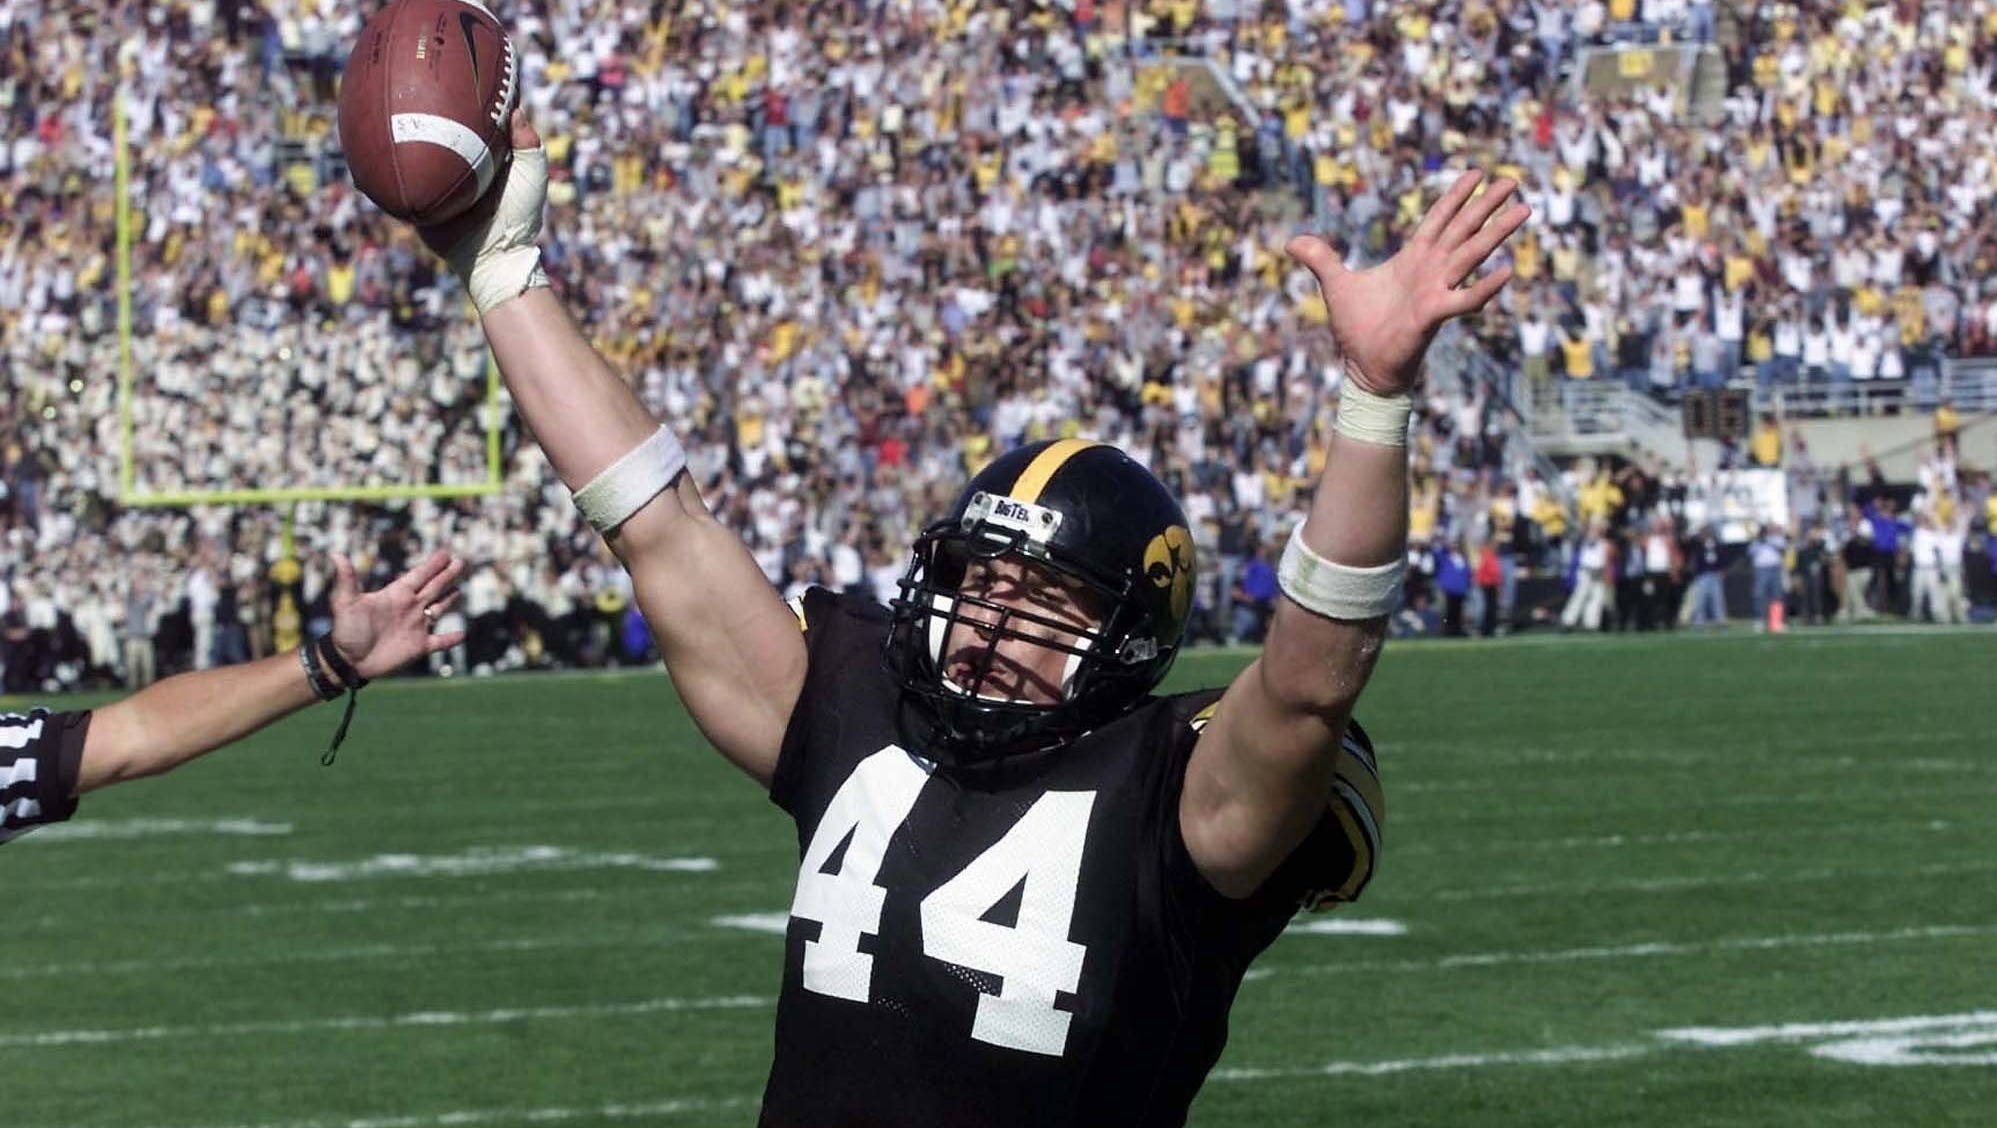 Dallas Clark catches the go-ahead touchodwn pass against Purdue in 2002 with 67 seconds left, a fourth-down catch that propelled Iowa to a 31-28 win. Earlier in that game, Clark raced for a 95-yard touchdown catch up the left sideline.